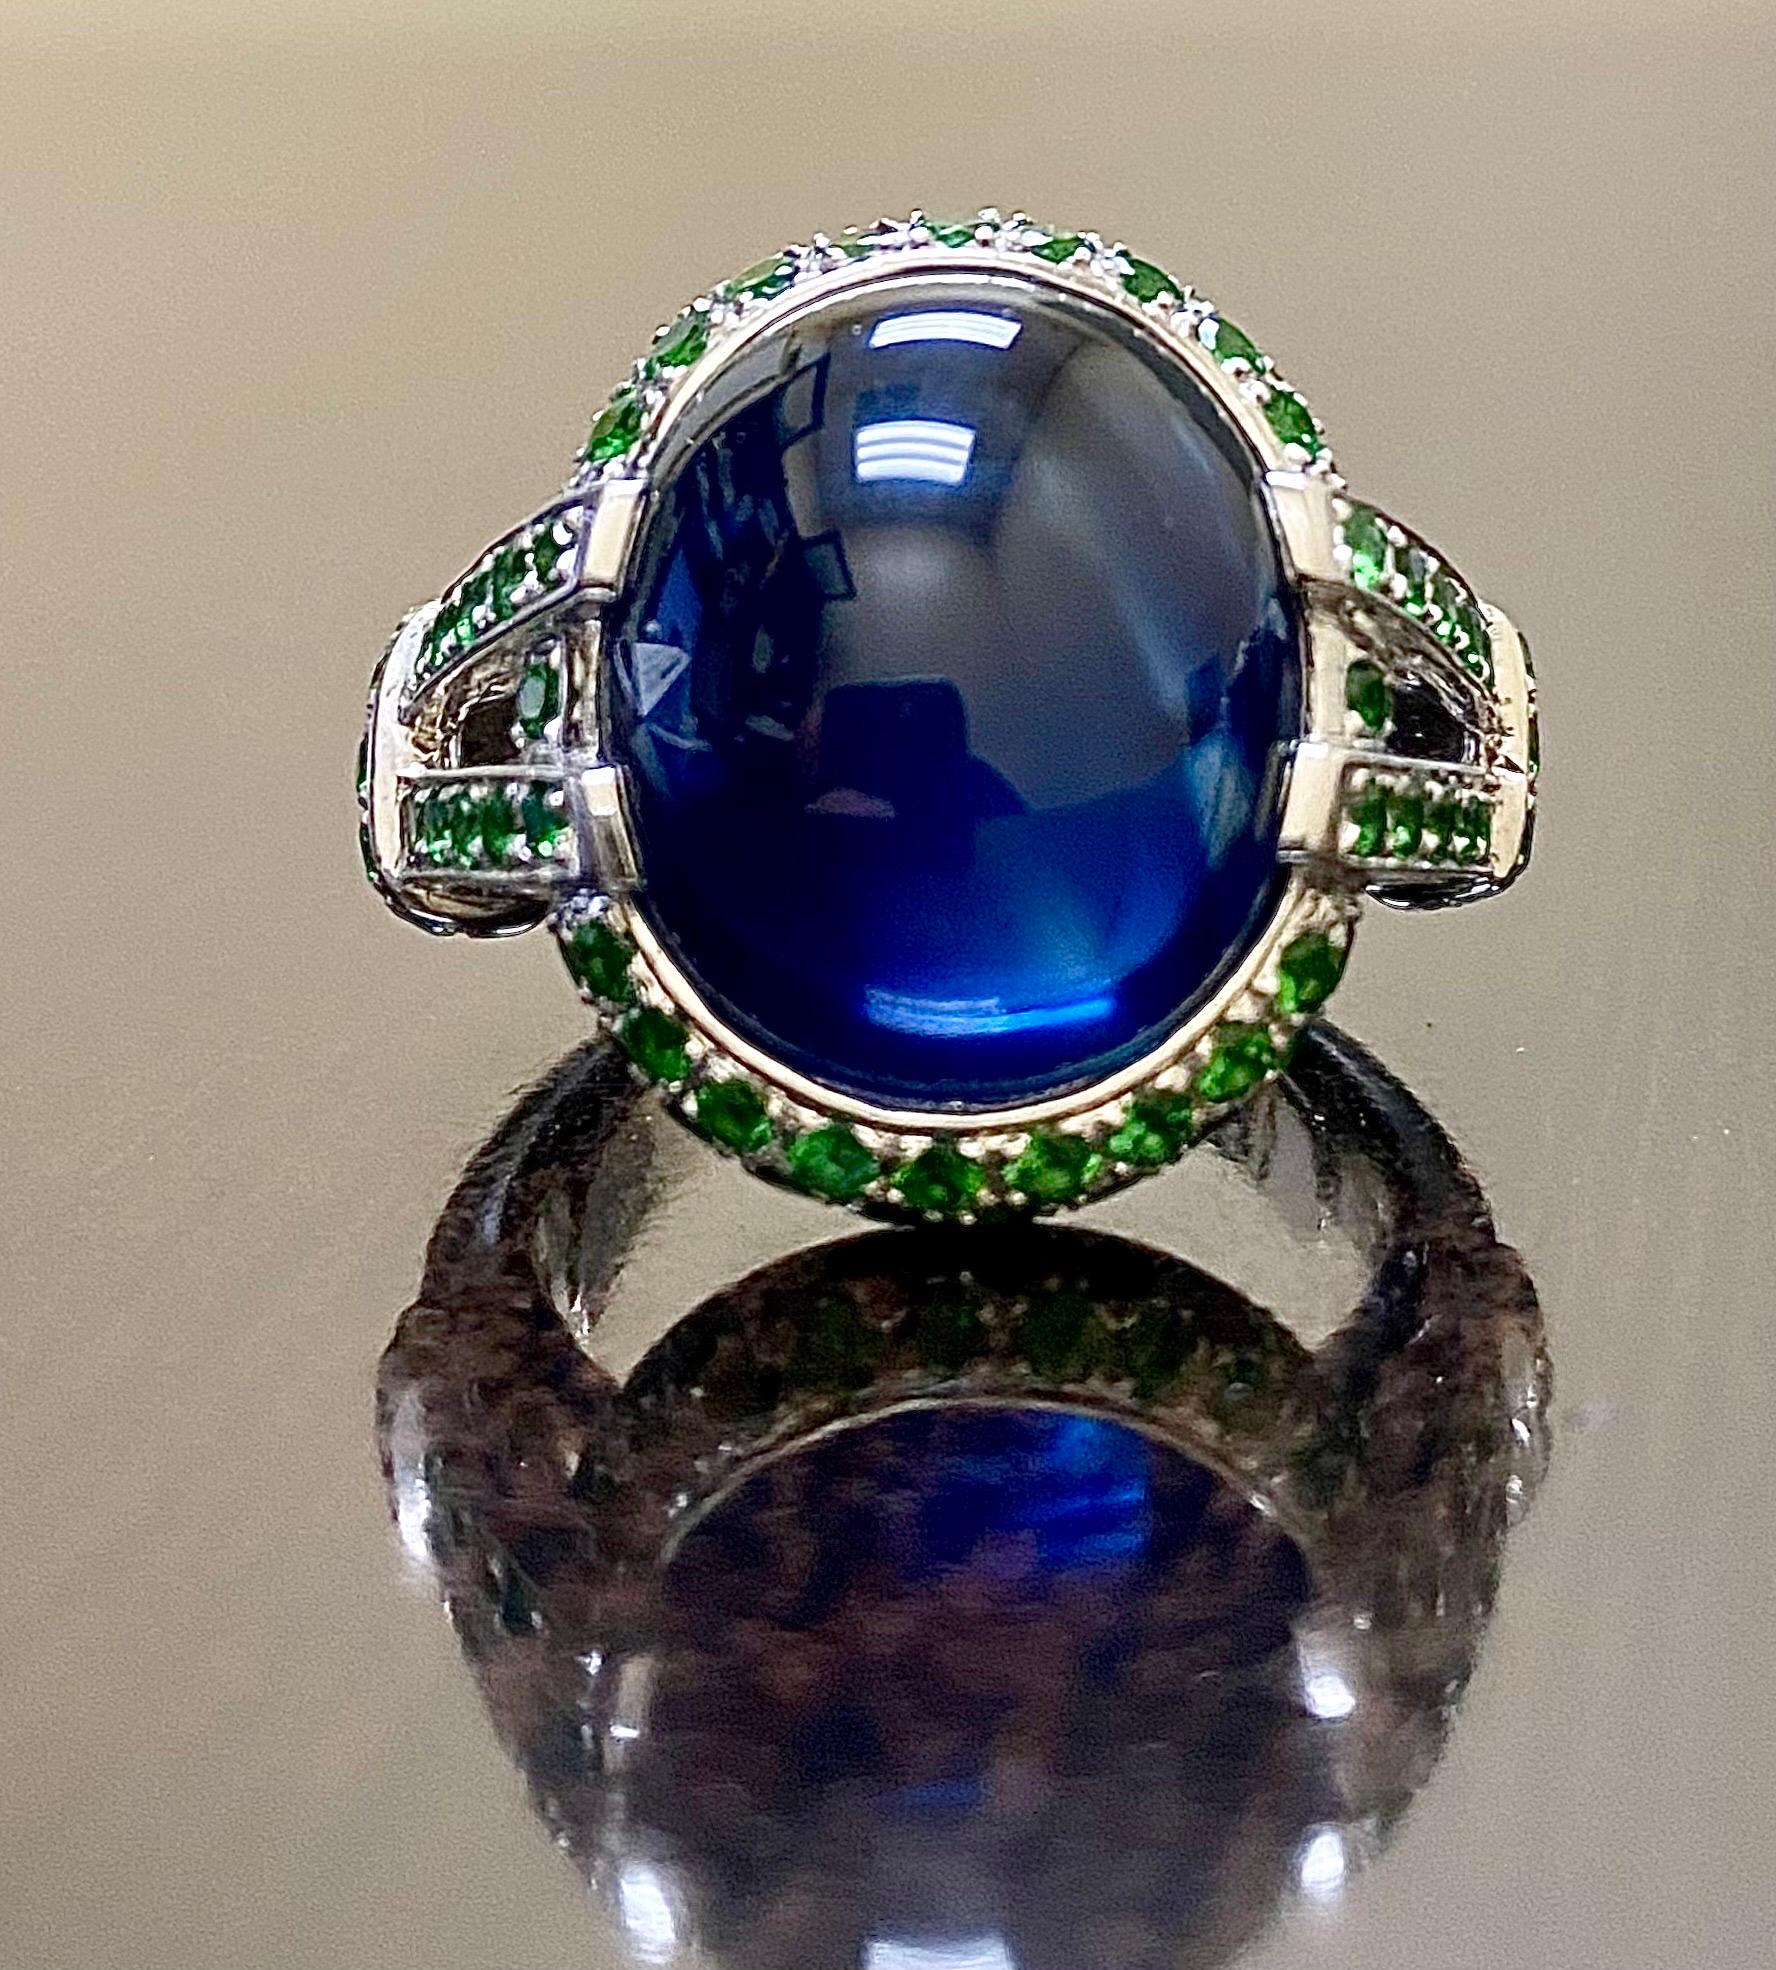 DeKara Design Collection 

Metal- 90% Platinum, 10% Iridium. 

Stones- 1 Genuine Cabochon Blue Sapphire 16.16 Carats, 72 Round Tsavorite Garnets 1.31 Carats. 

Featuring a Dazzling Ring With a Whopping 16.16 Carat Genuine Oval Cabochon Blue